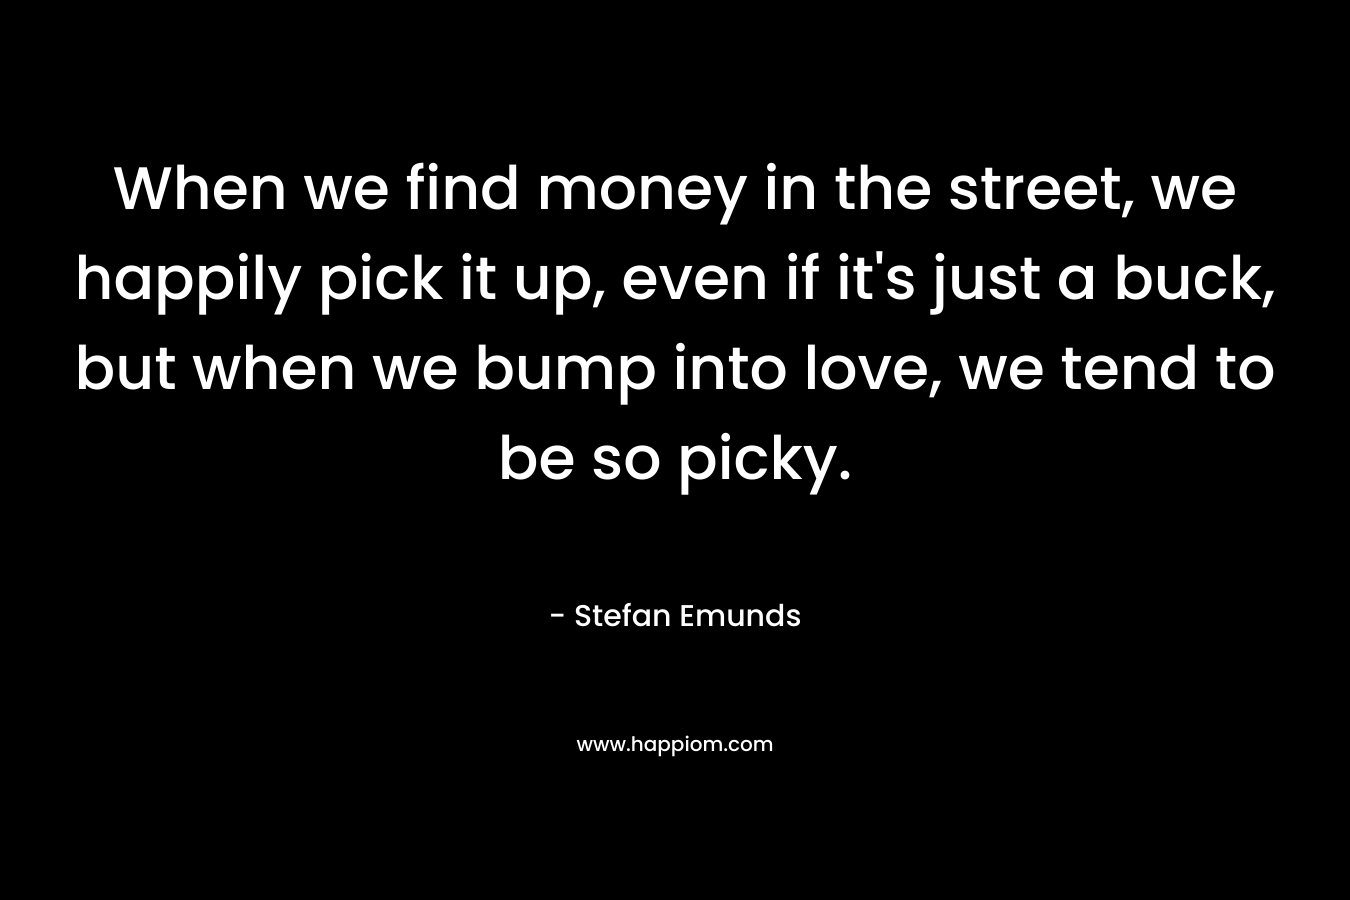 When we find money in the street, we happily pick it up, even if it’s just a buck, but when we bump into love, we tend to be so picky. – Stefan Emunds